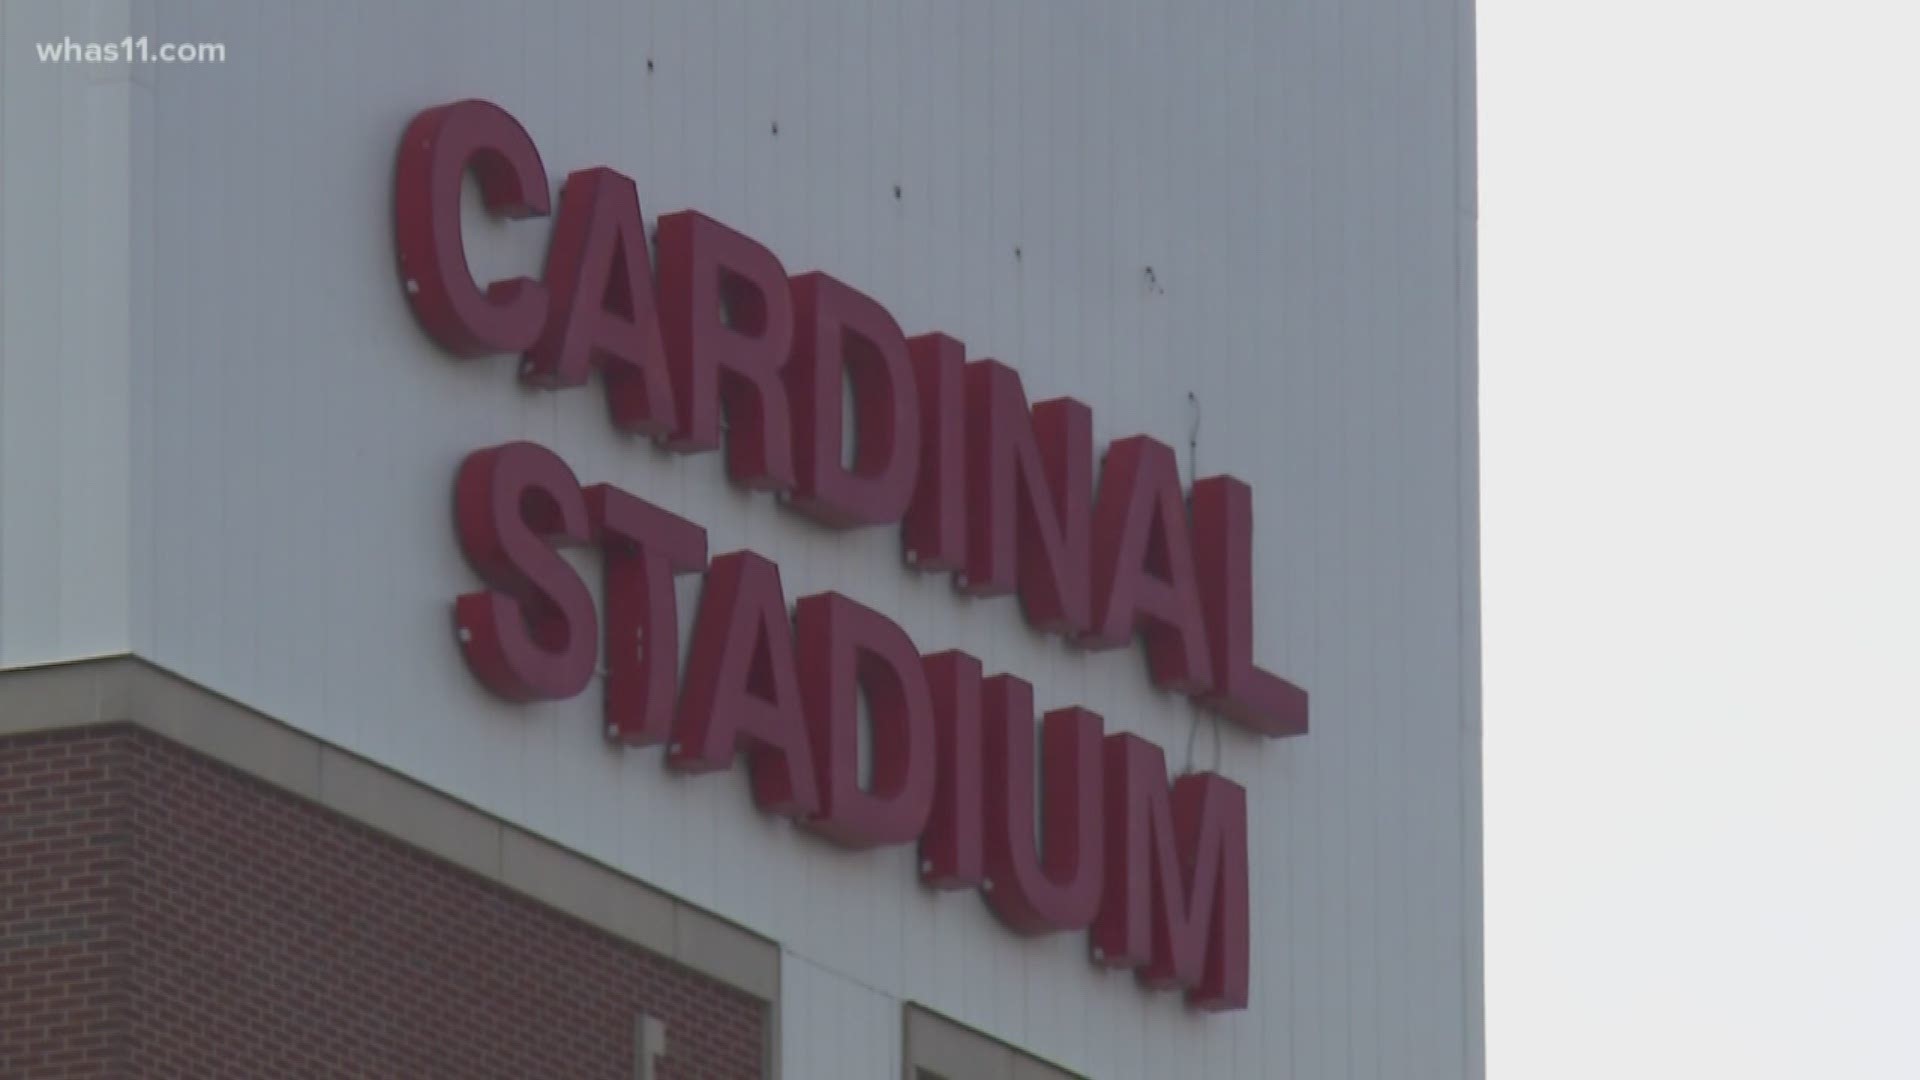 Cardinal Stadium expected to be renamed by next season after $9.5 million termination agreement reached with John Schnatter.